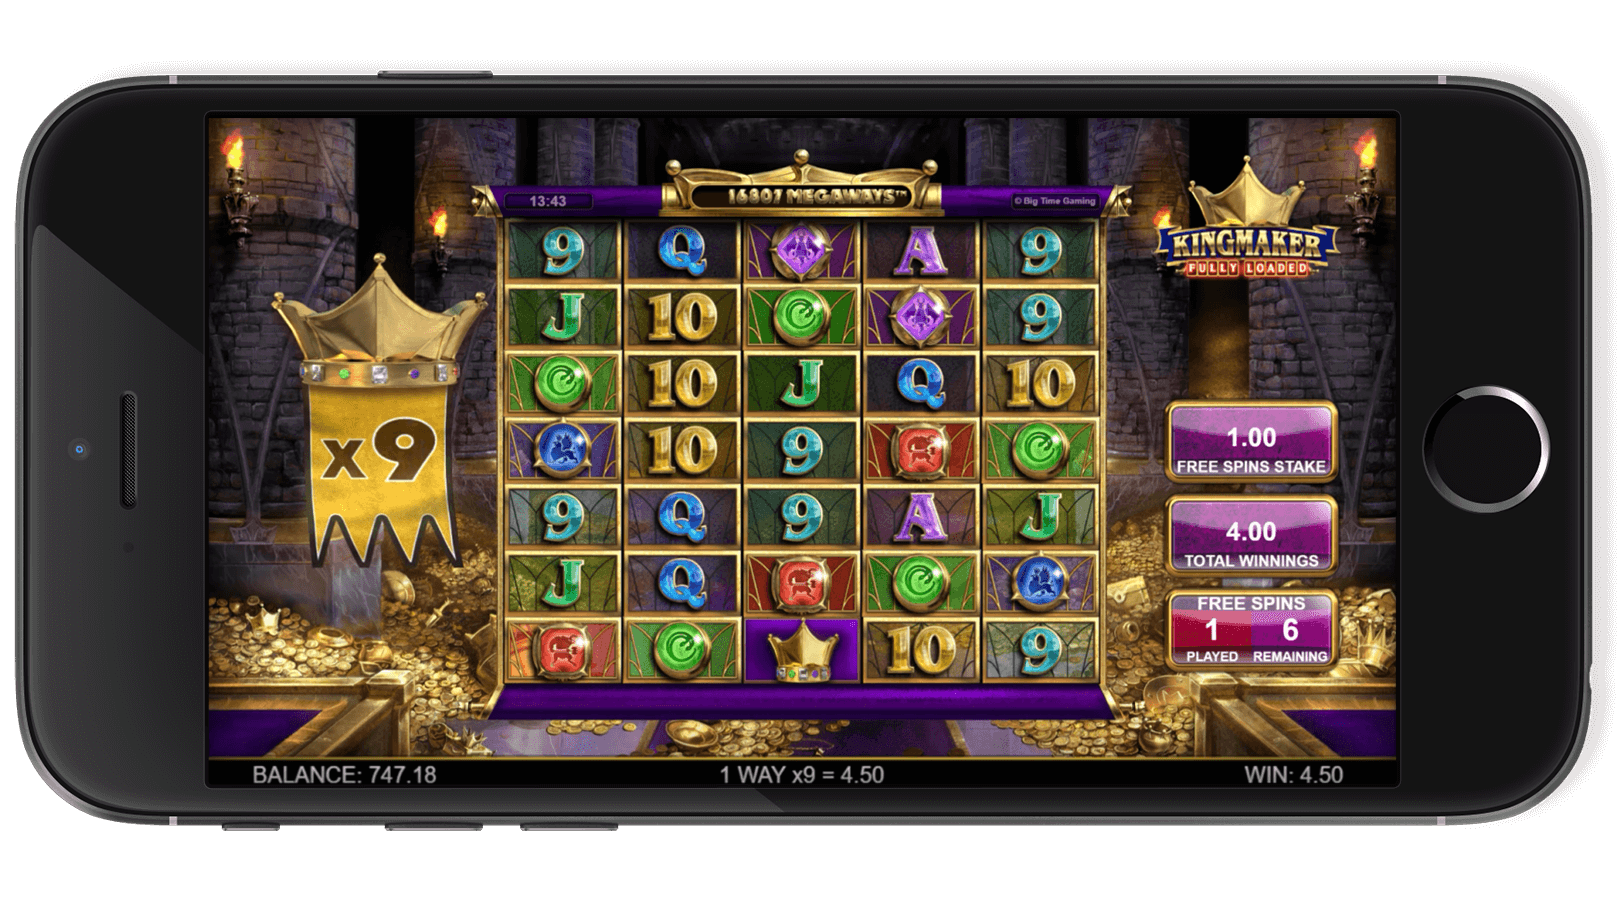 KingMaker_FullyLoaded_02_FreeSpins1_mobile.png